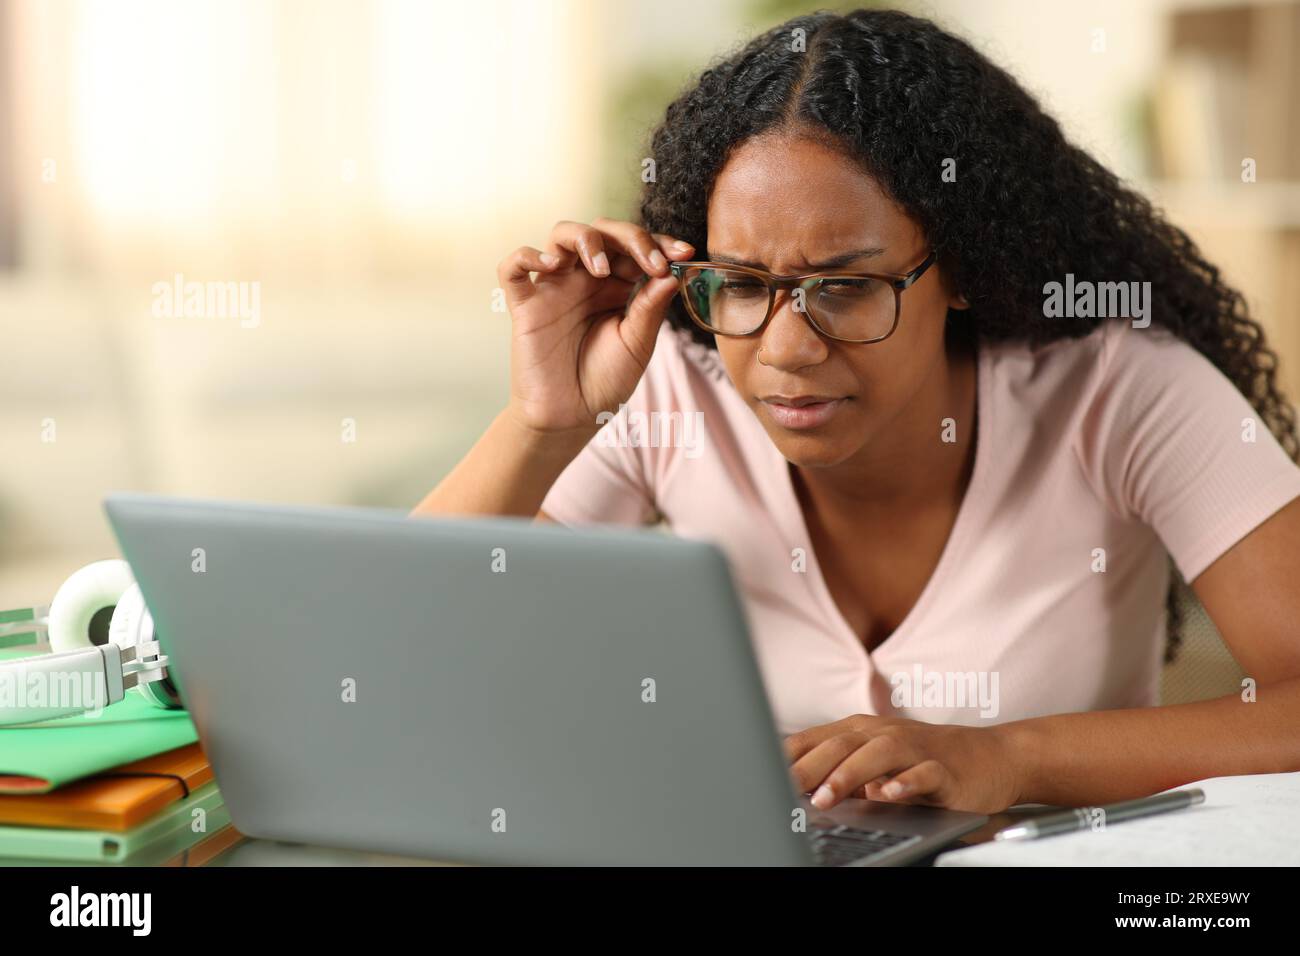 Black student wearing eyeglasses forcing sight using laptop at home Stock Photo